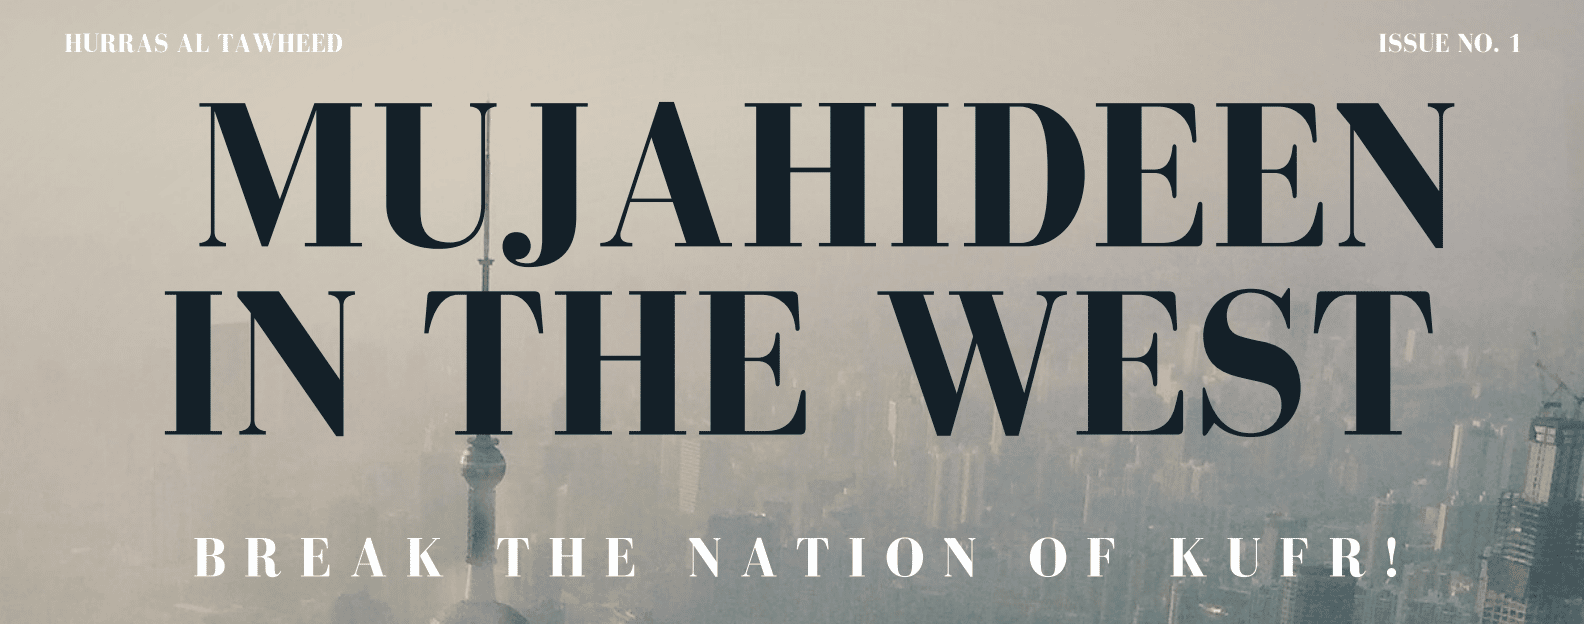 AQC Affiliated - Hurras Al-Tawheed Media House: Mujahideen In The West 'Break The Nation of Kufr' Issue #1